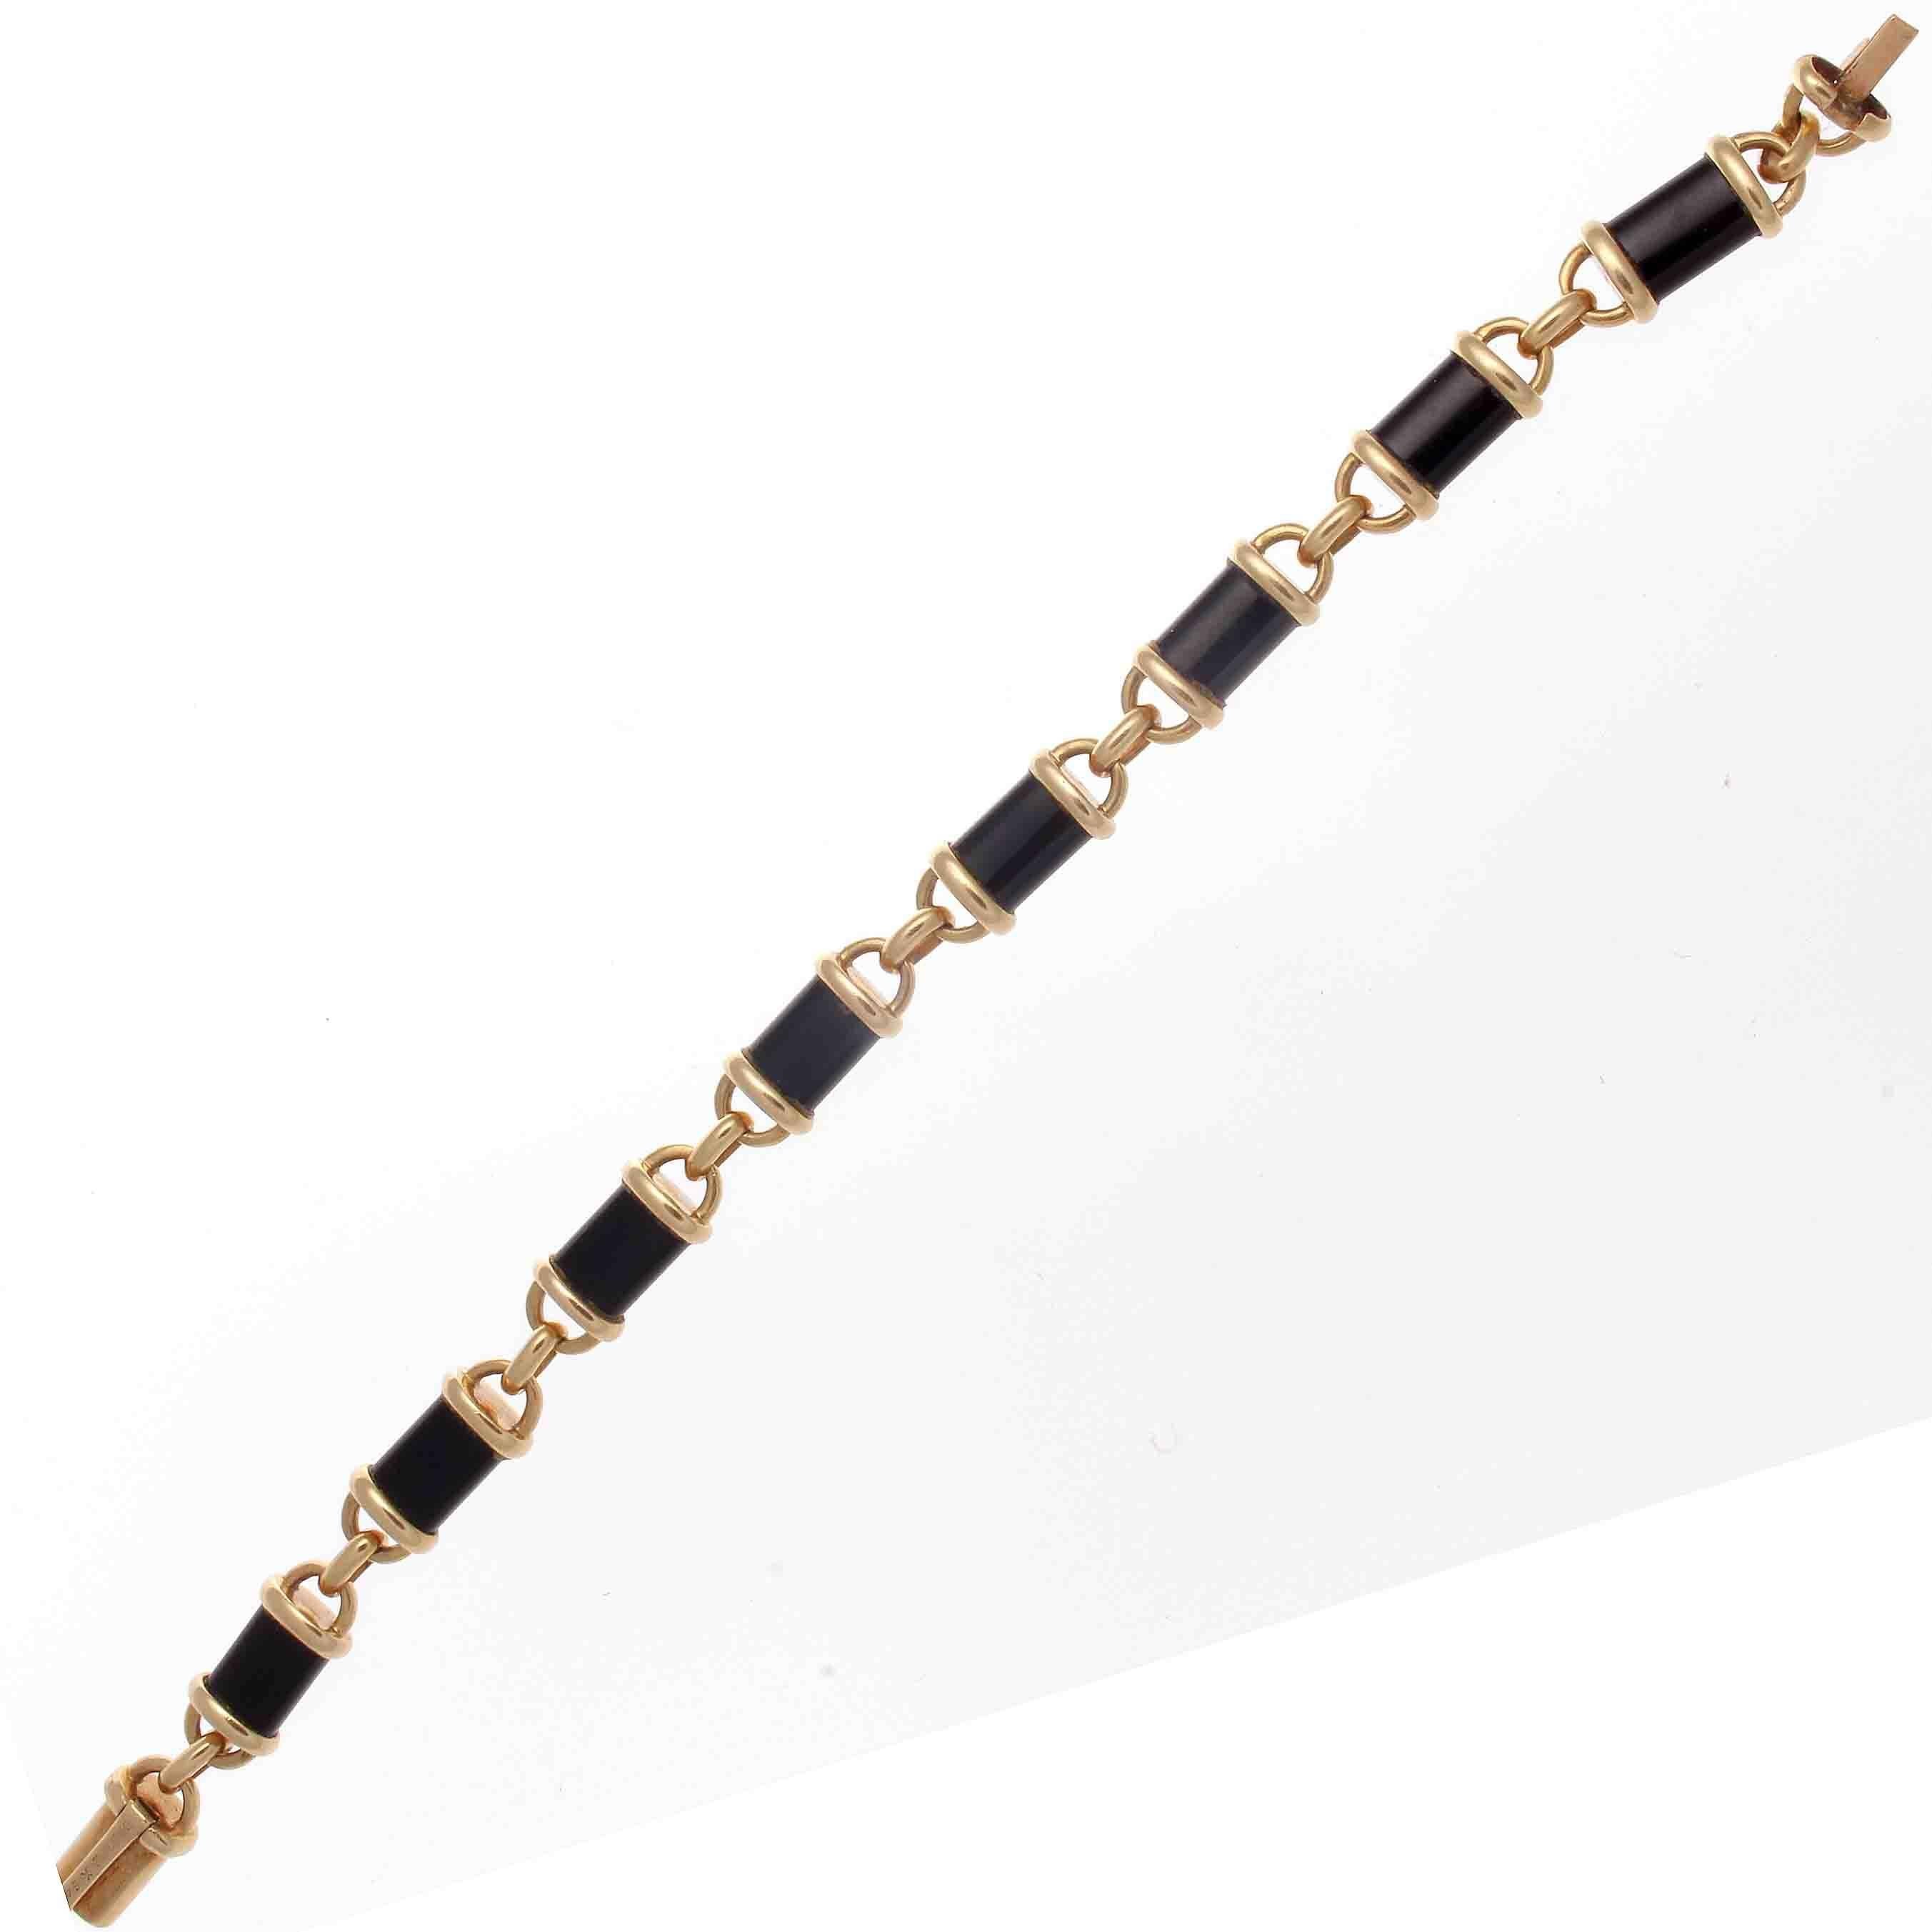 Style effortlessly radiates from each of Van Cleef and Arpels creations. Designed with cylinders of jet black onyx interconnected by links of glistening 18k yellow gold. A classic combination. Signed VCA, numbered and stamped with French hallmarks.